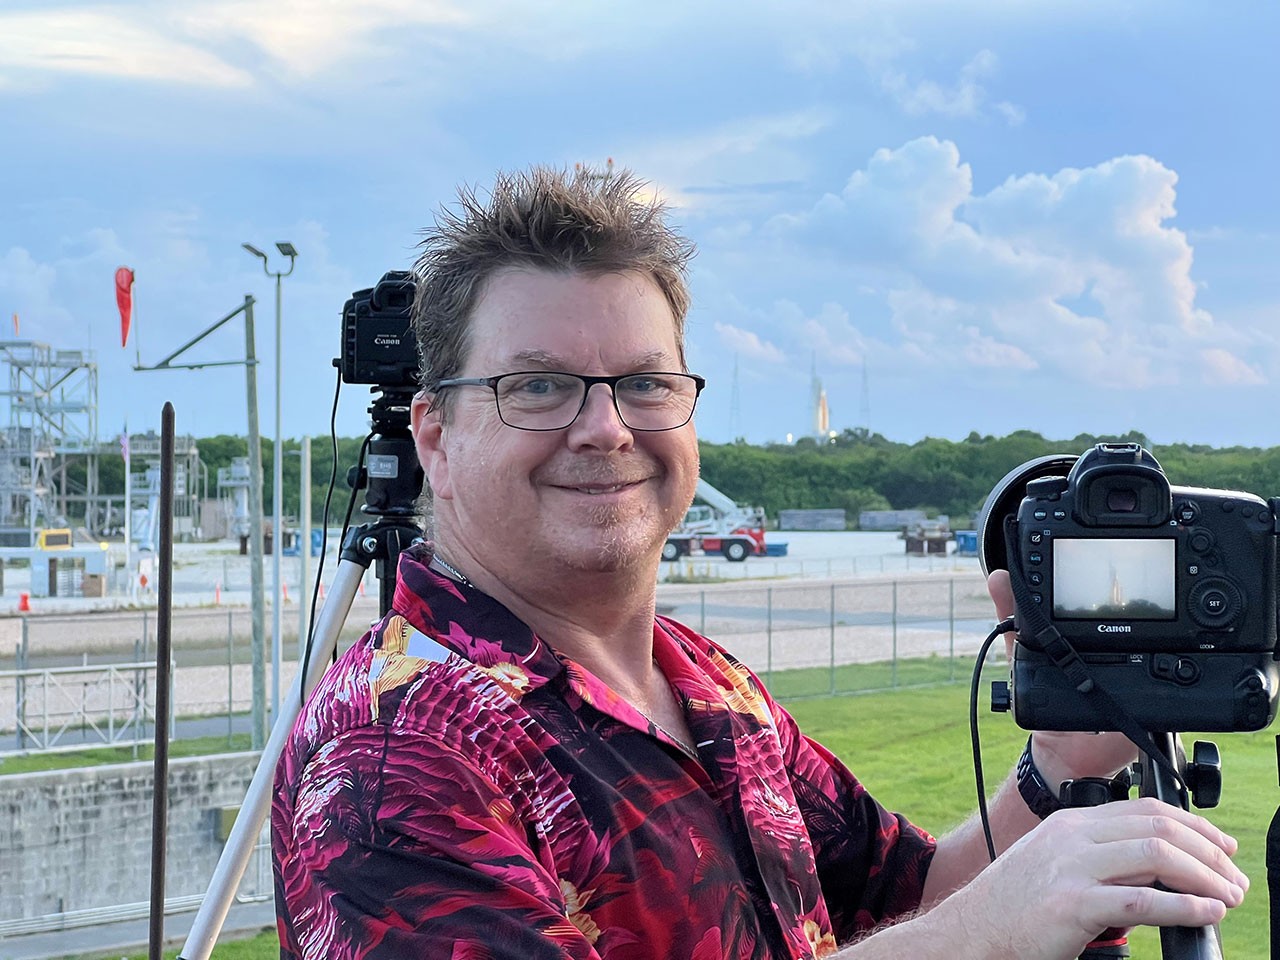 John Grant with the Space Launch System (SLS) rocket in camera view finder and in background on NASA Launch Pad 39B at Kennedy Space Center.